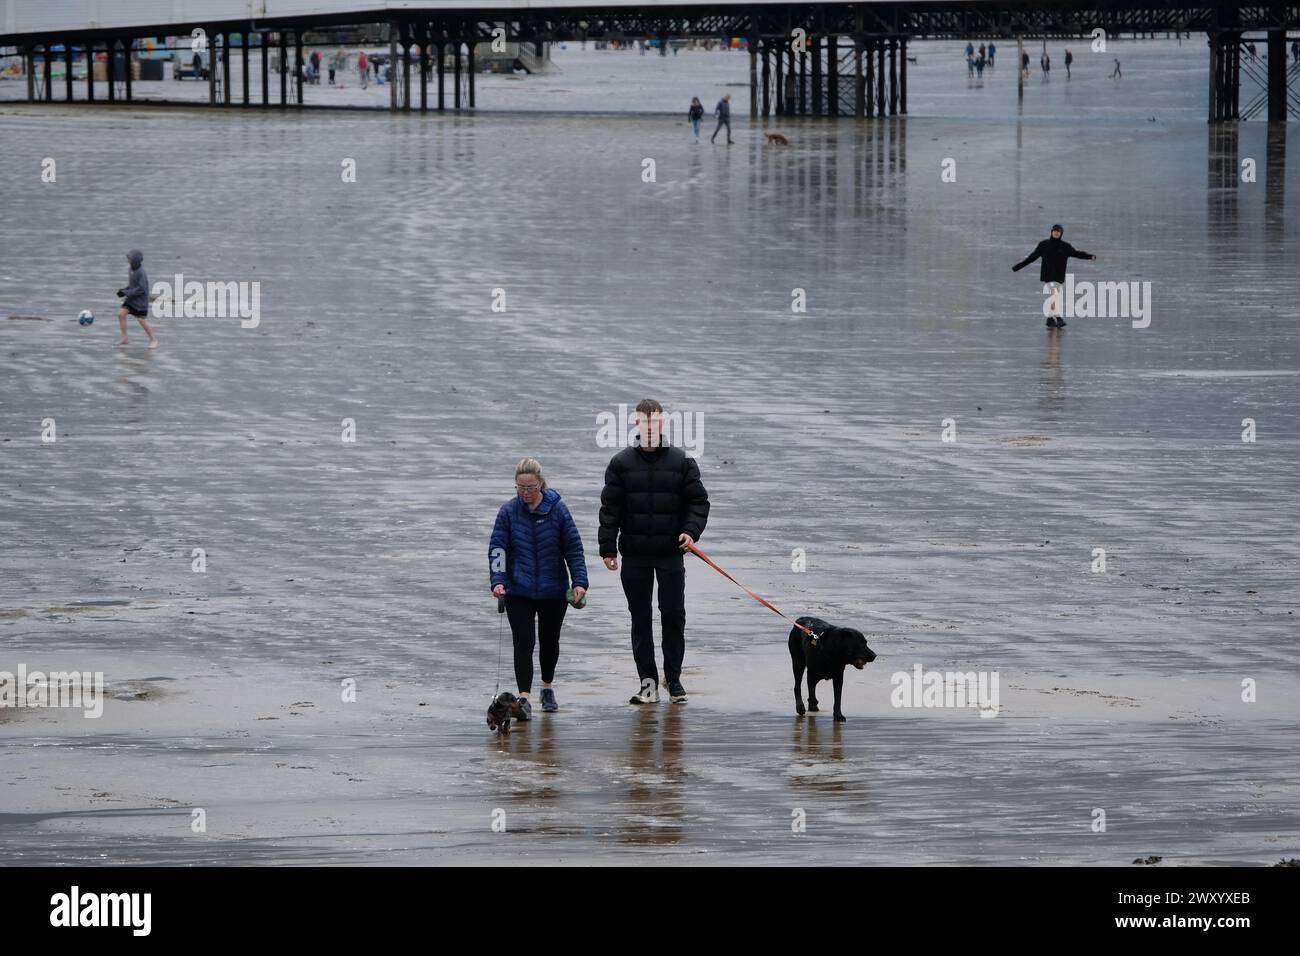 Two people walking their dog on a cold, wet, windy, rainy beach. Stock Photo